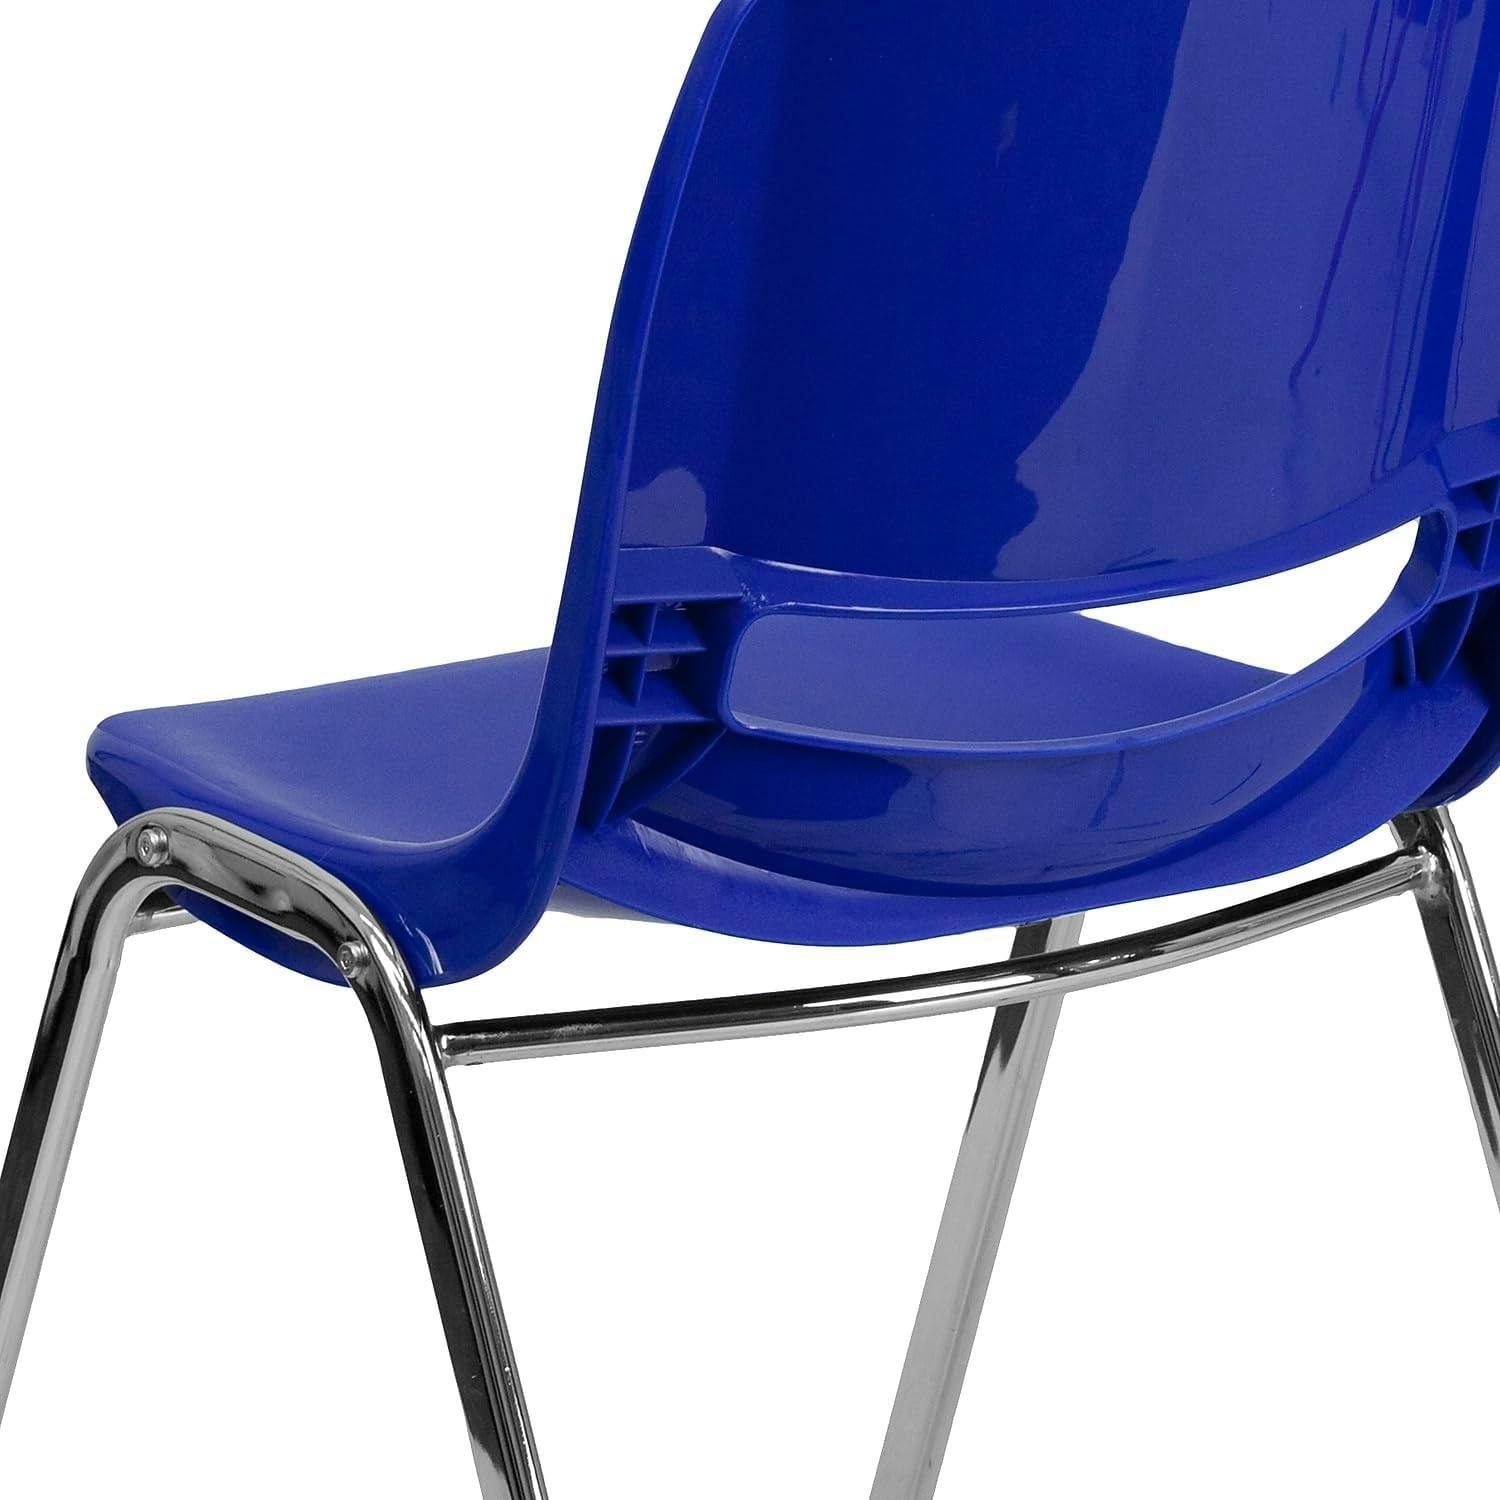 Navy Chrome Ergonomic Mid-Back Stacking Chair for Education